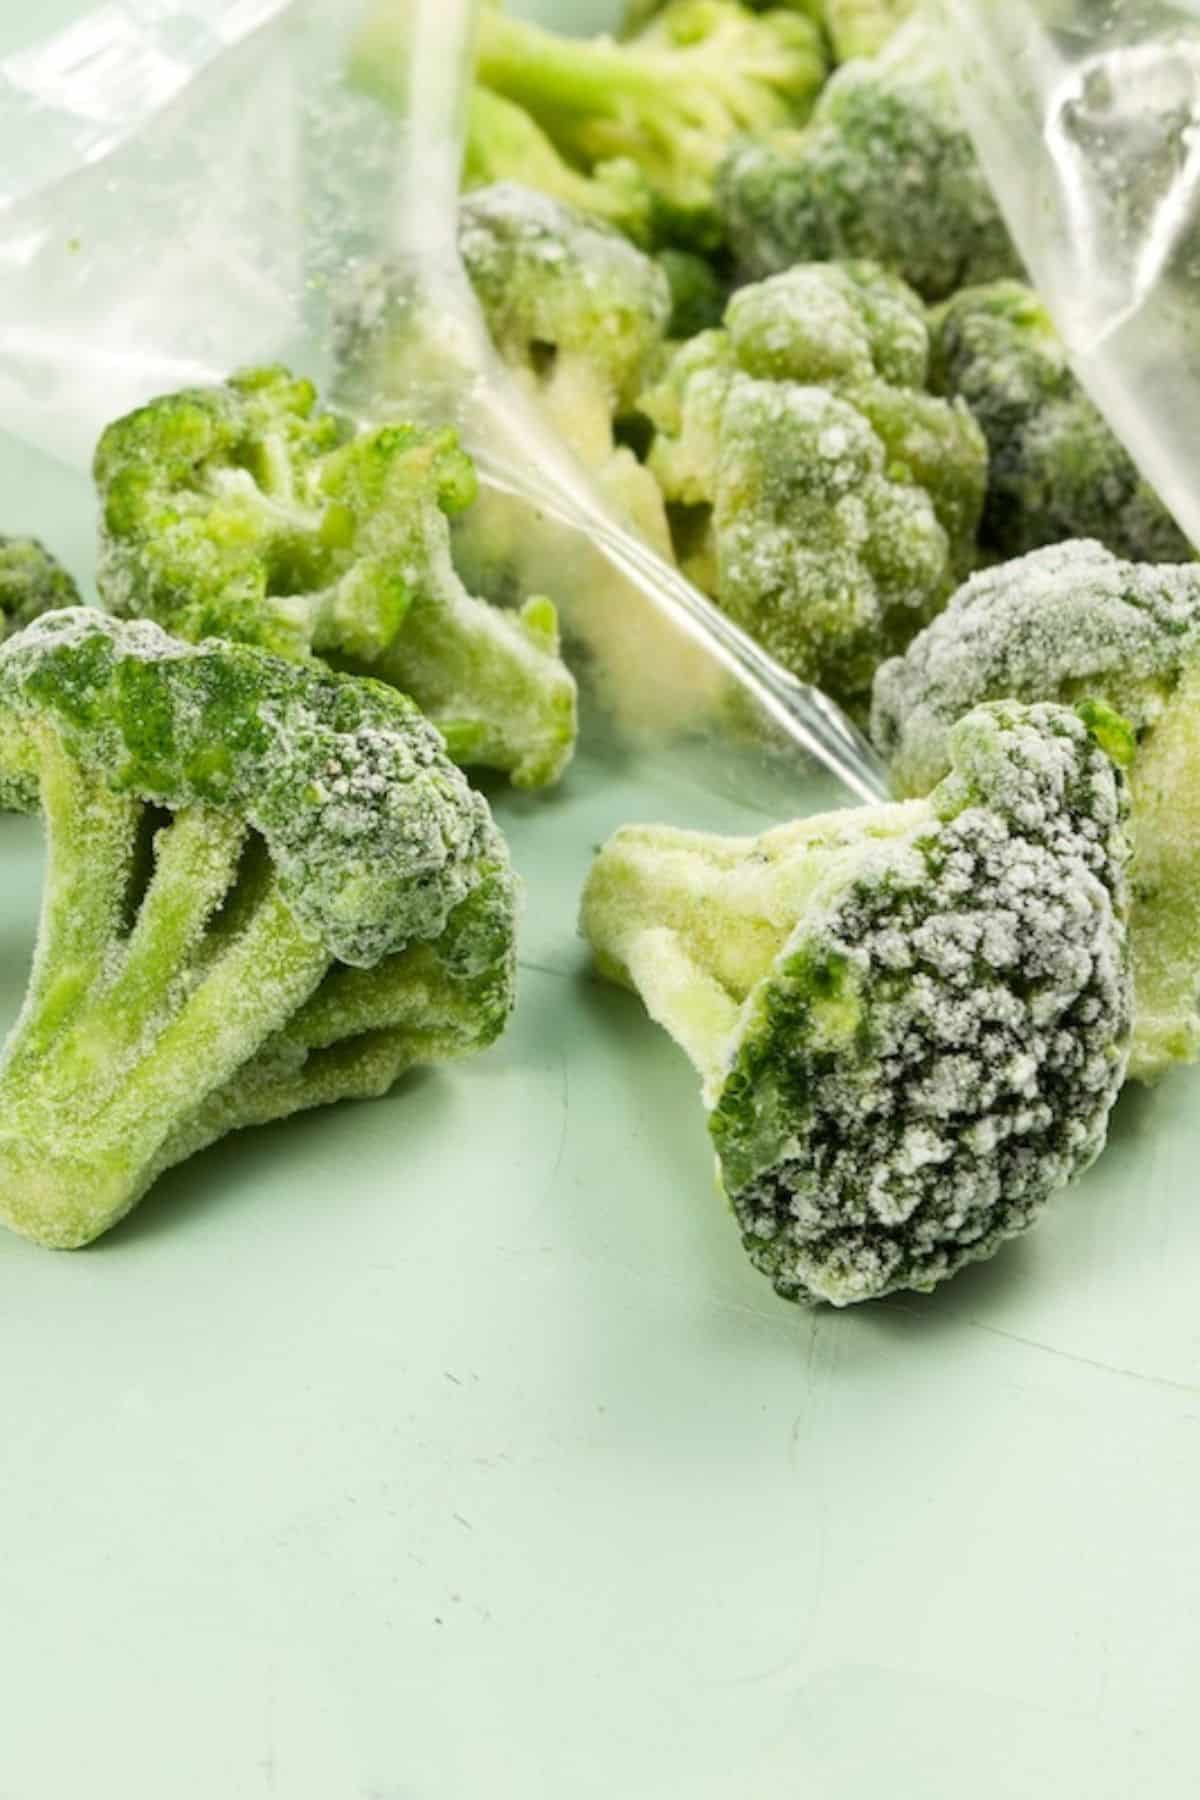 frozen broccoli on table in bag.